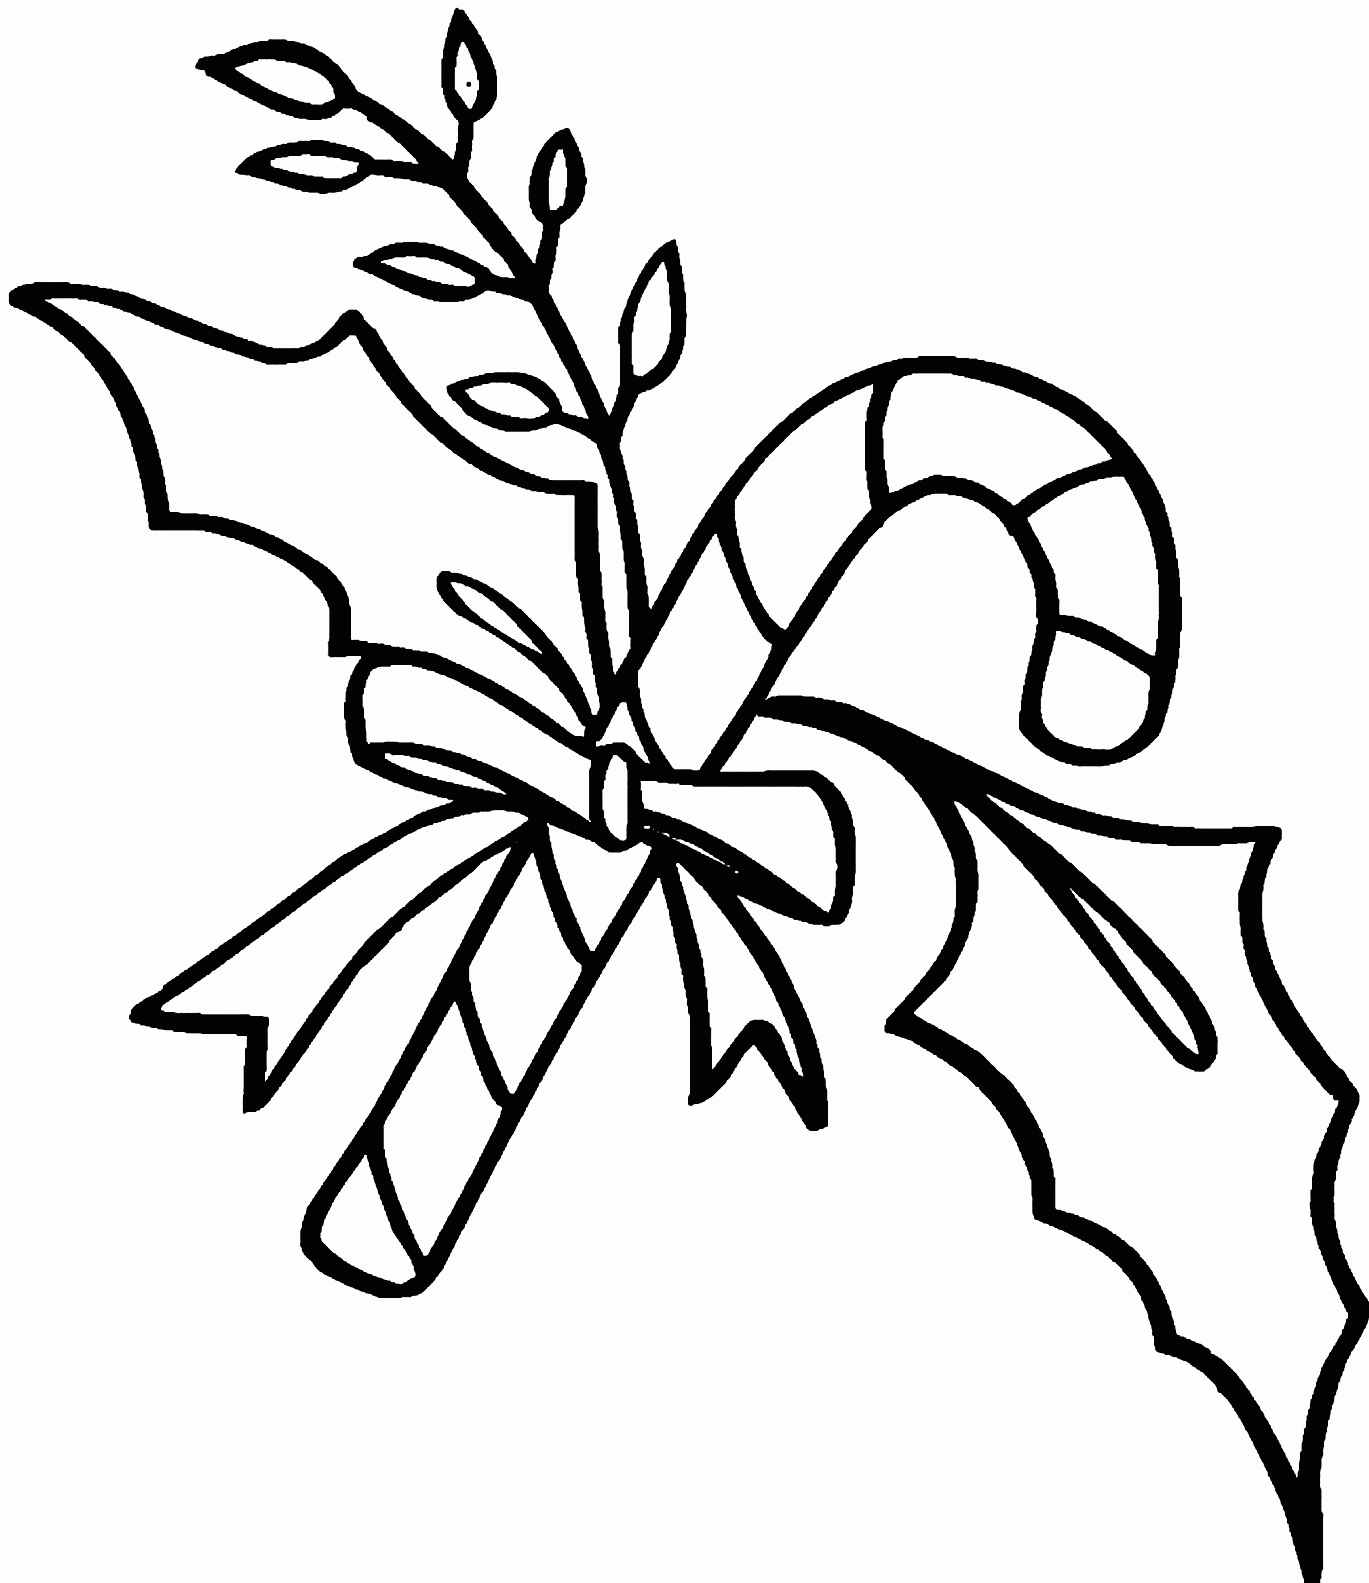 Printable Candy Cane Coloring Pages | Coloring Me